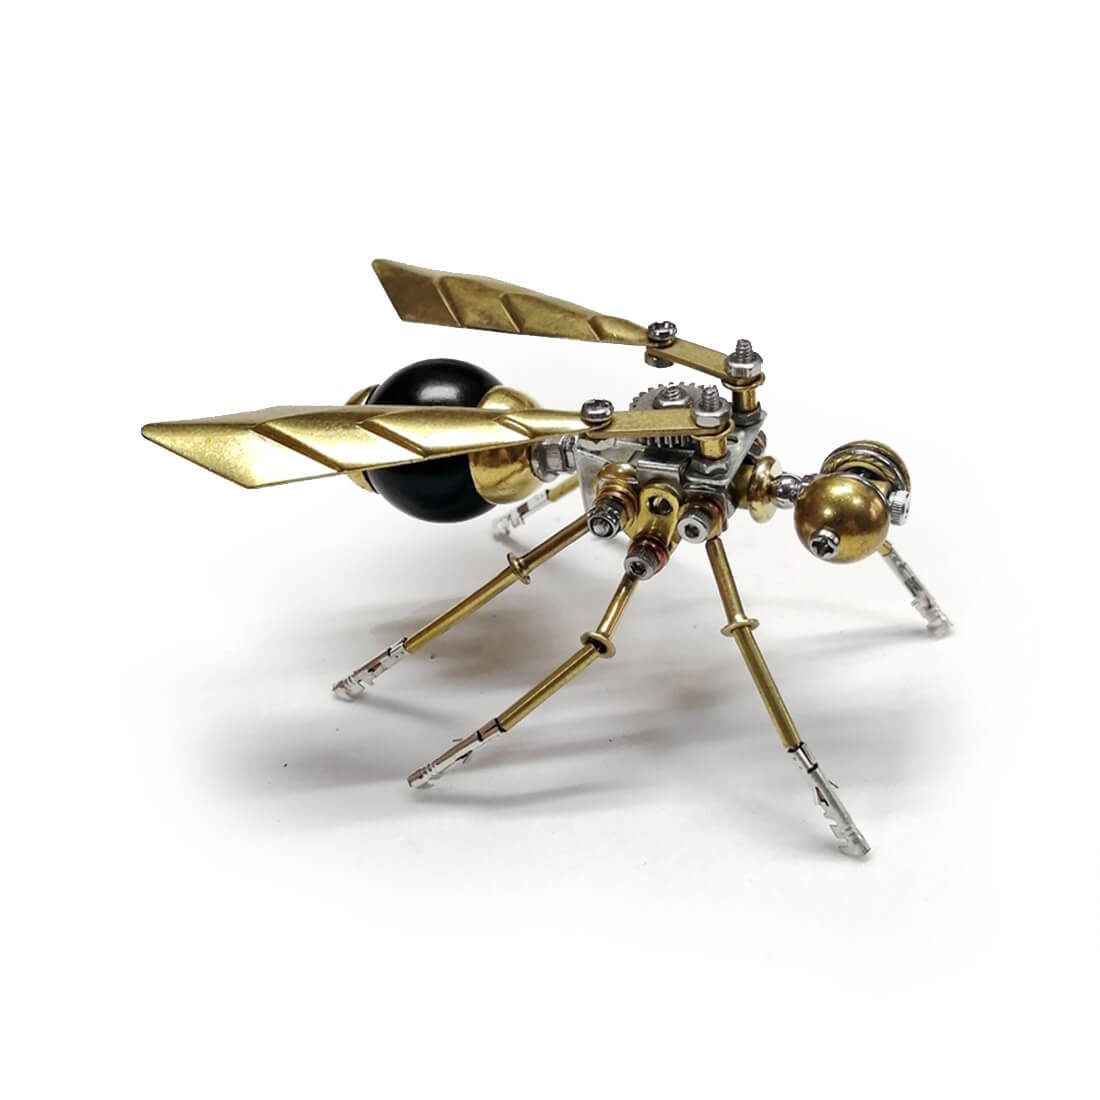 3D DIY Steampunk Mechanical Insect Metal Assembly Model (100+PCS)